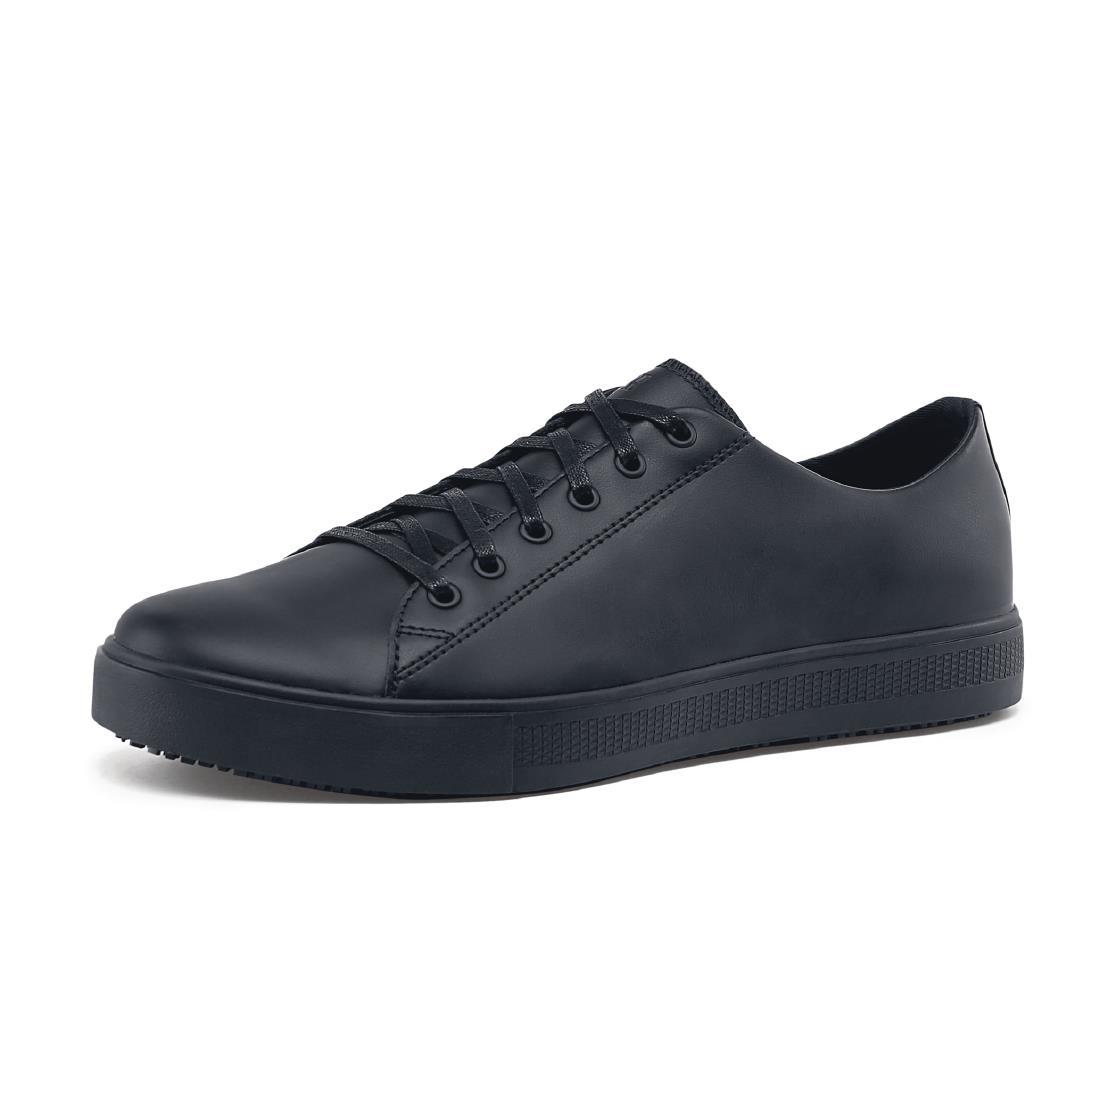 Shoes for Crews Old School Trainers Black 35 - BB161-35  - 6